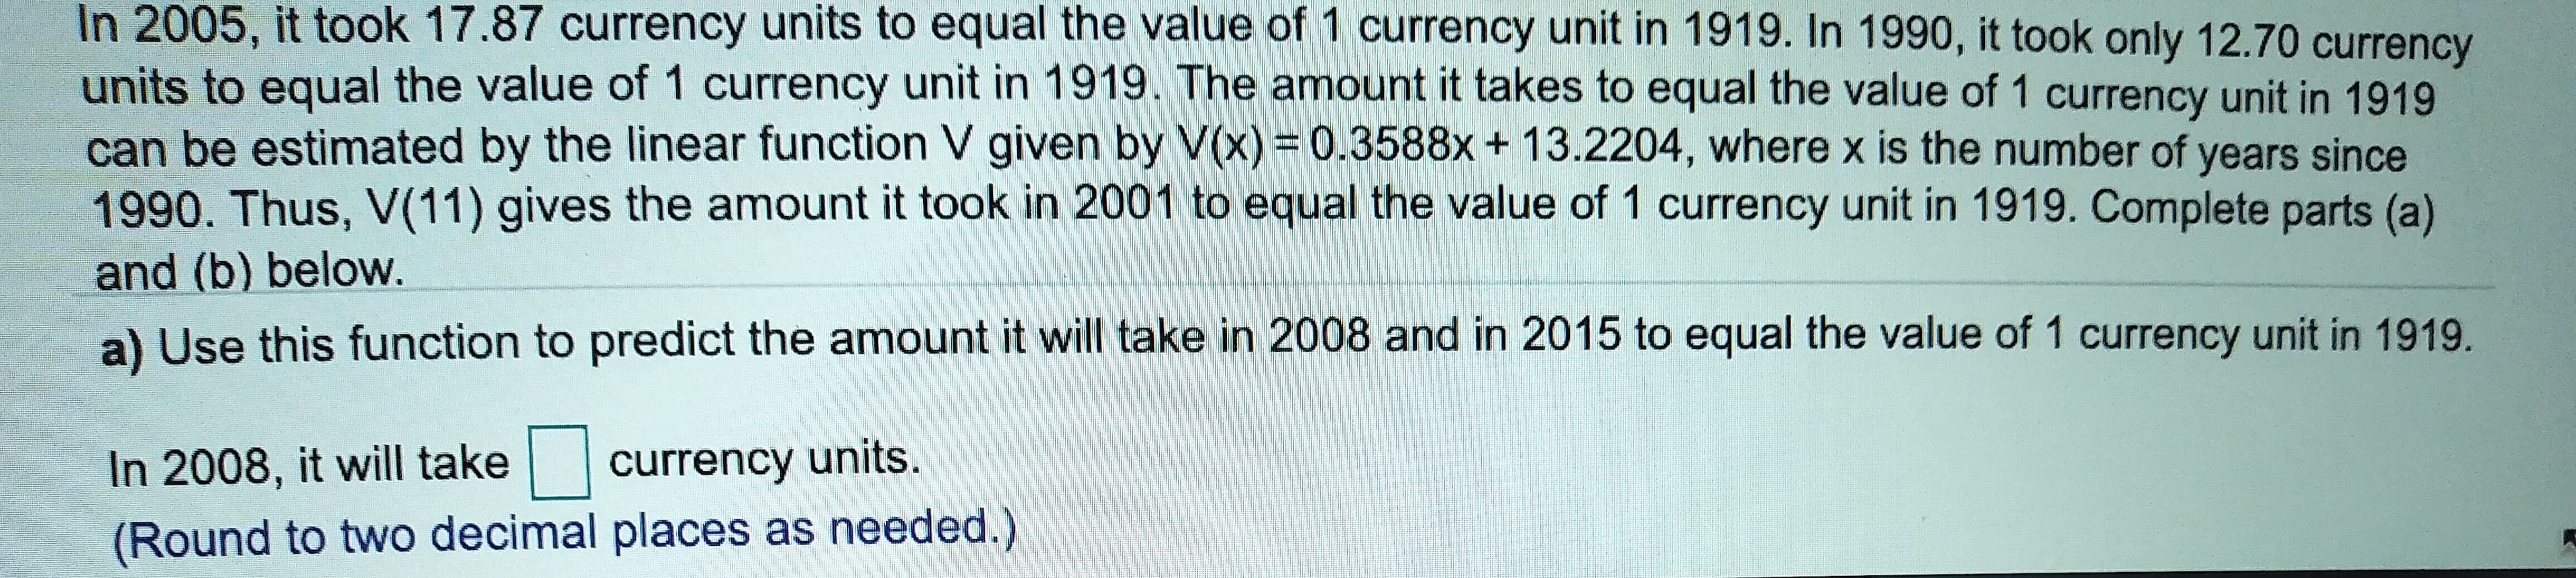 In 2005, it took 17.87 currency units to equal the value of 1 currency unit in 1919. In 1990, it took only 12.70 currency
units to equal the value of 1 currency unit in 1919. The amount it takes to equal the value of 1 currency unit in 1919
can be estimated by the linear function V given by V(x) 0.3588x+ 13.2204, where x is the number of years since
1990. Thus, V(11) gives the amount it took in 2001 to equal the value of 1 currency unit in 1919. Complete parts (a)
and (b) below.
a) Use this function to predict the amount it will take in 2008 and in 2015 to equal the value of 1 currency unit in 1919.
currency units.
In 2008, it will take
(Round to two decimal places as needed.)
